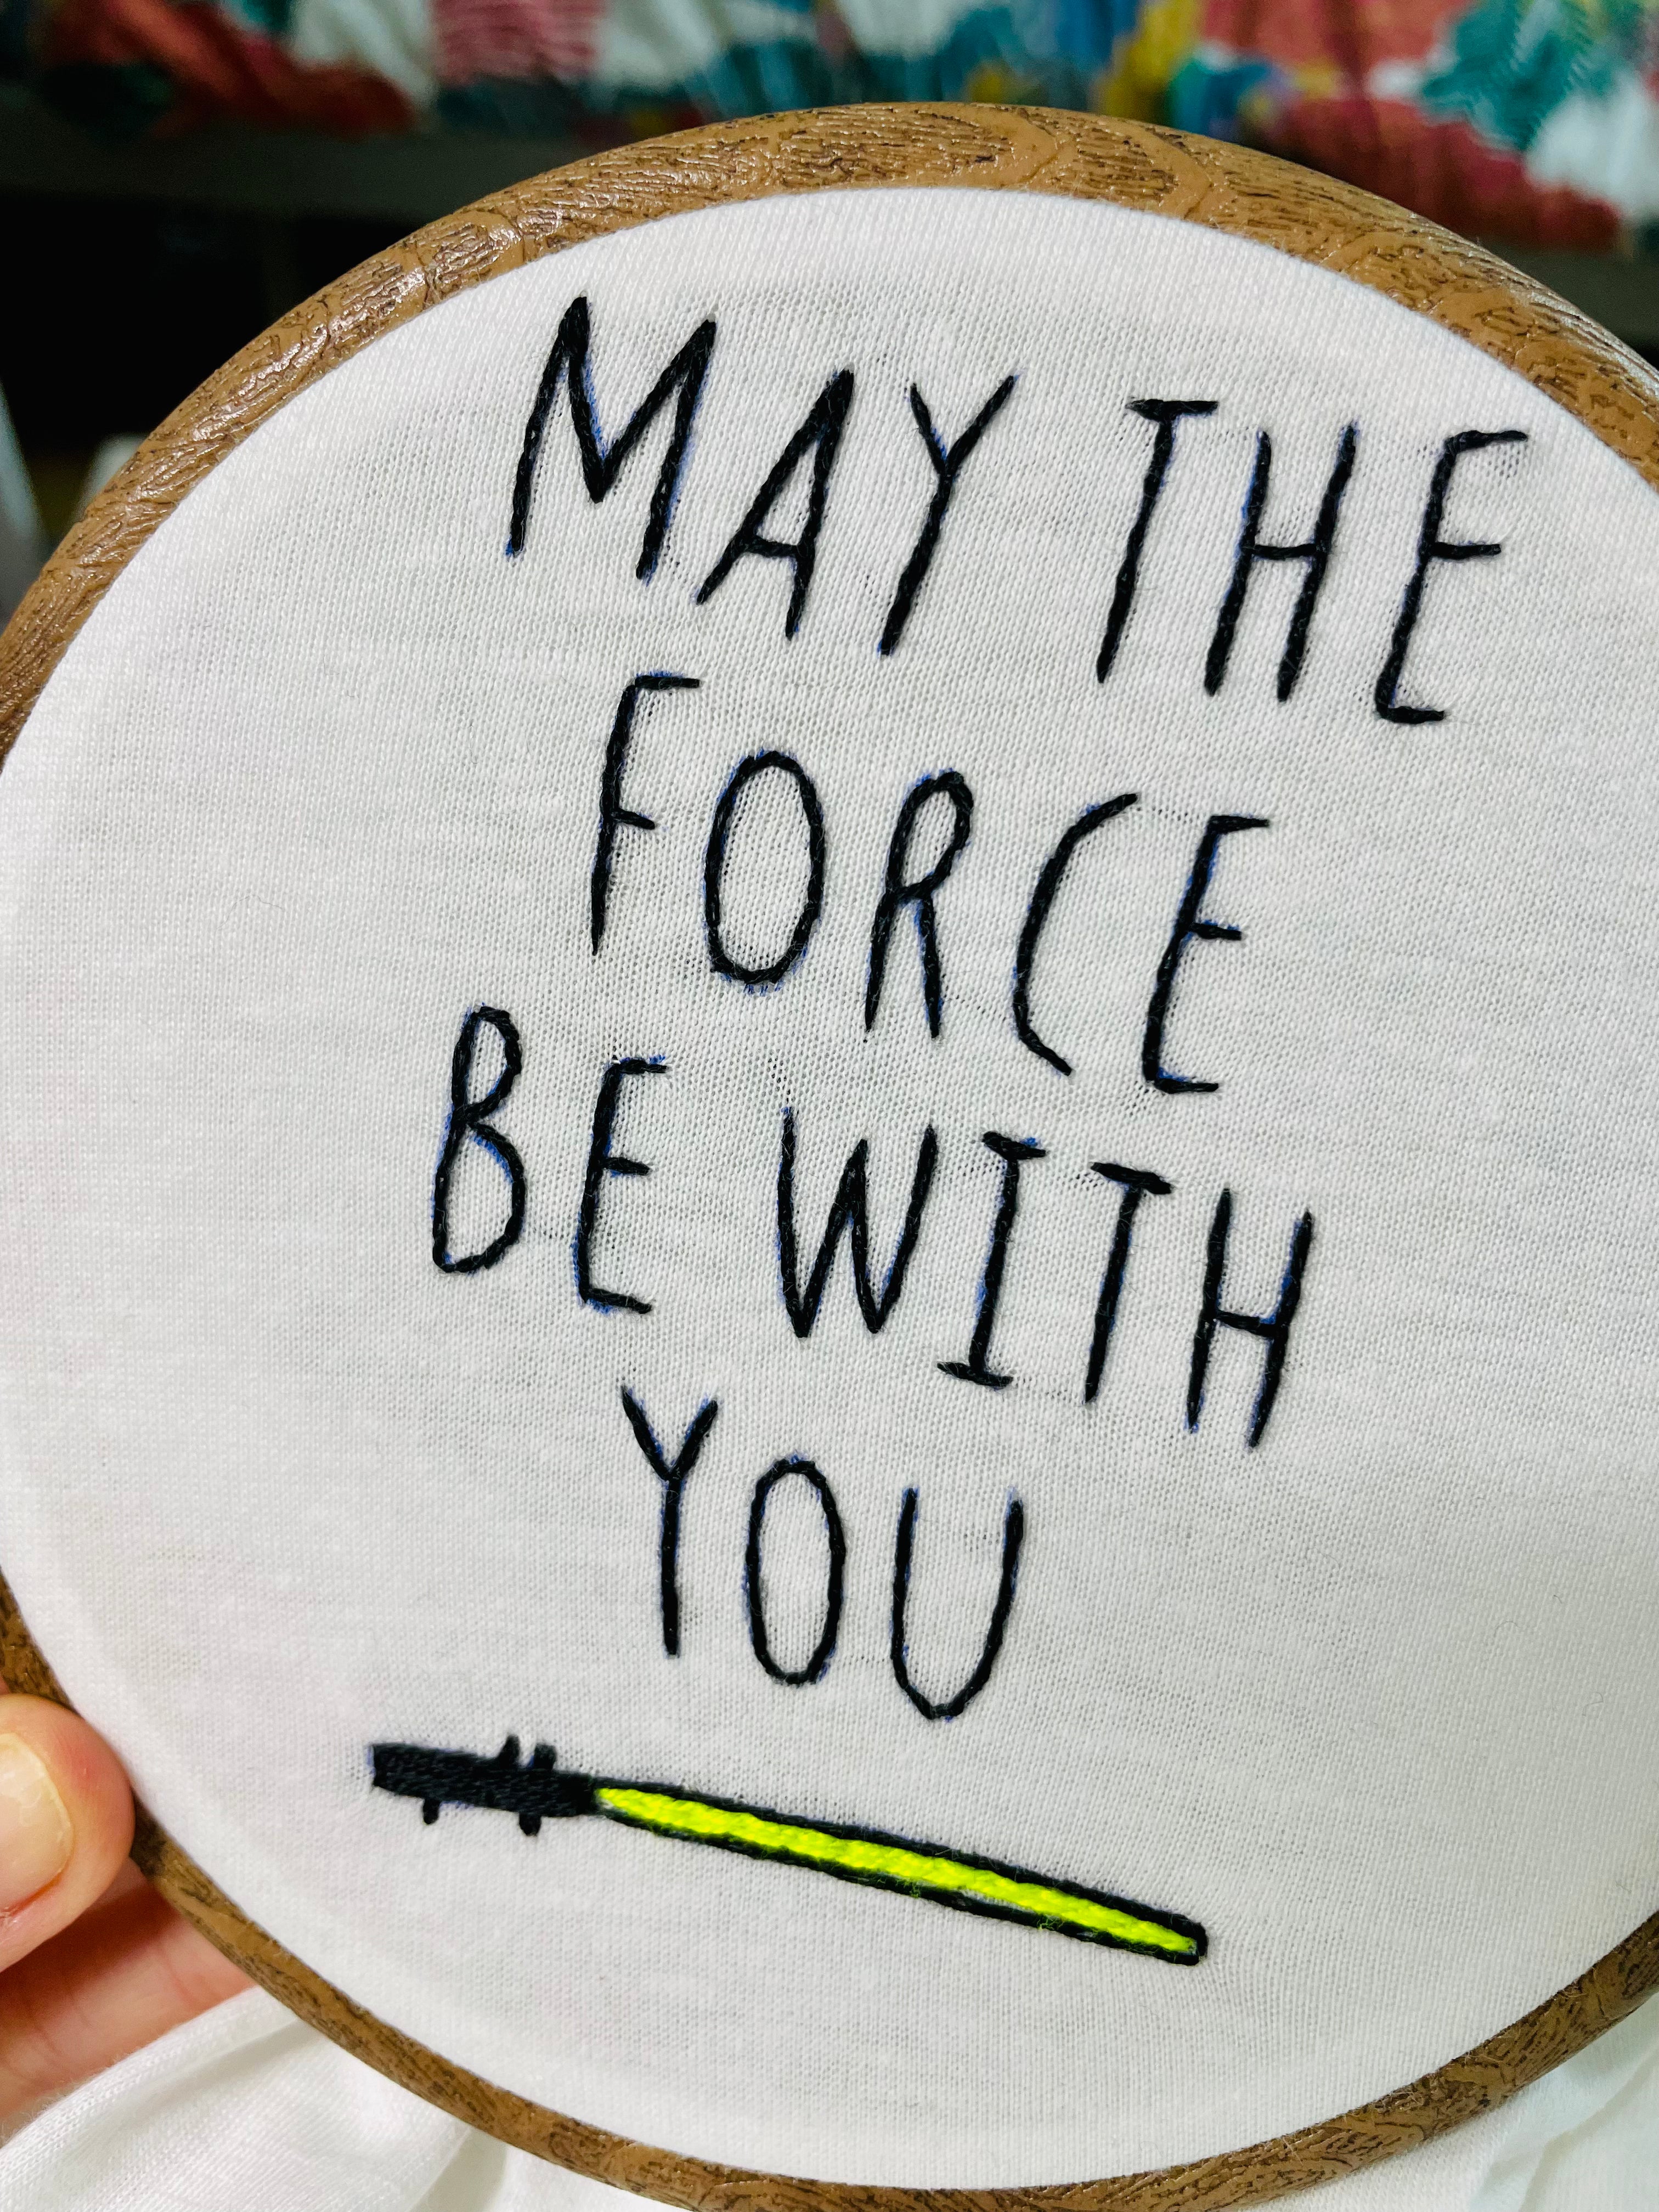 May the Force be with you! ⚡️